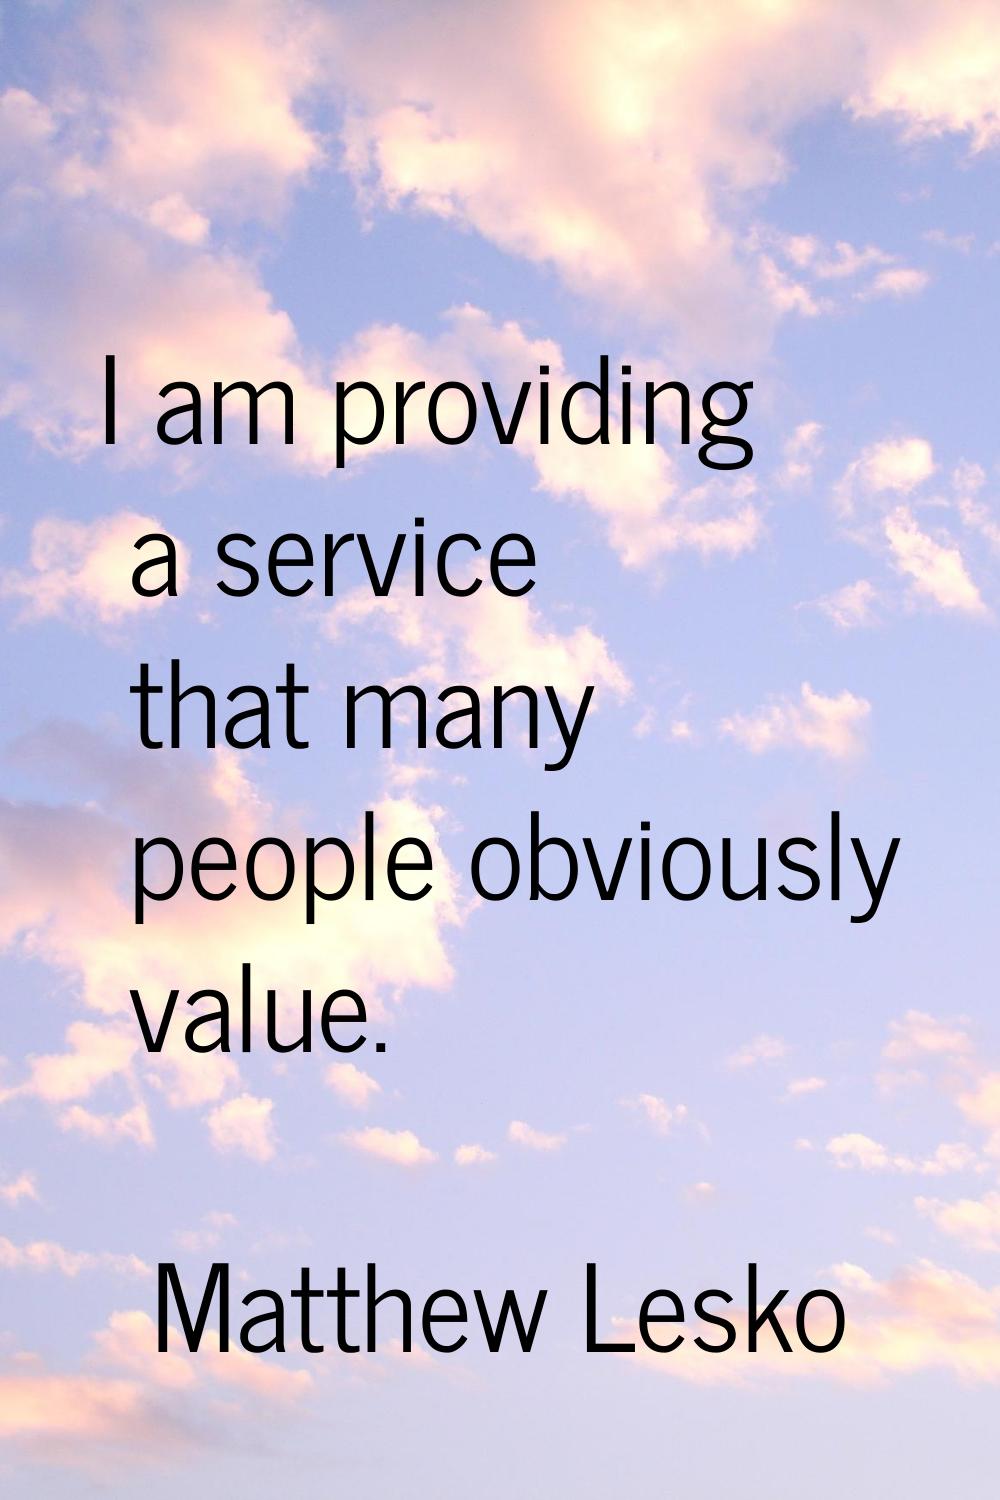 I am providing a service that many people obviously value.